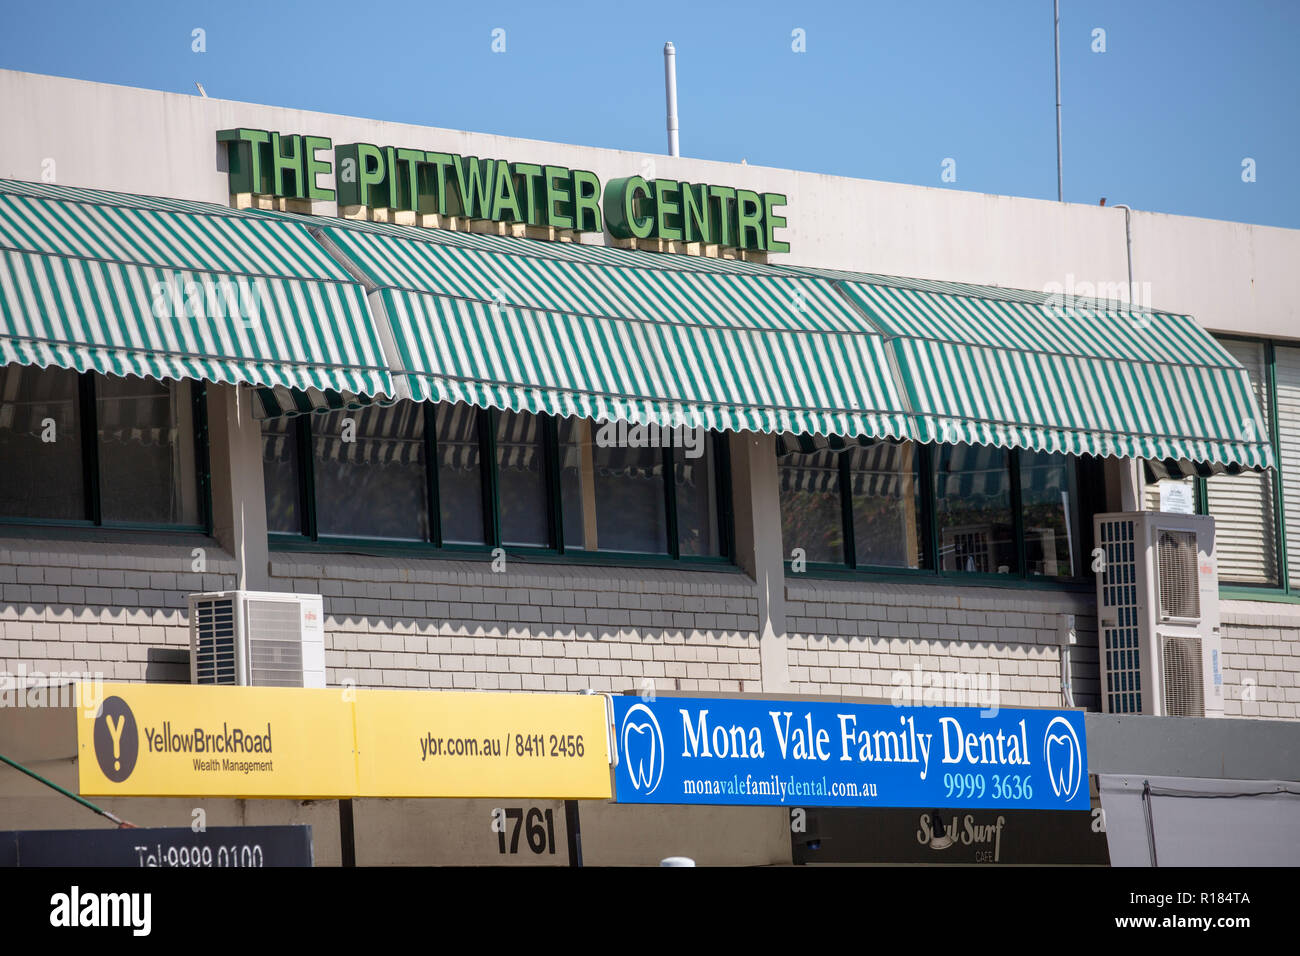 Pittwater centre and wealth management business in Mona Vale,Sydney,Australia Stock Photo